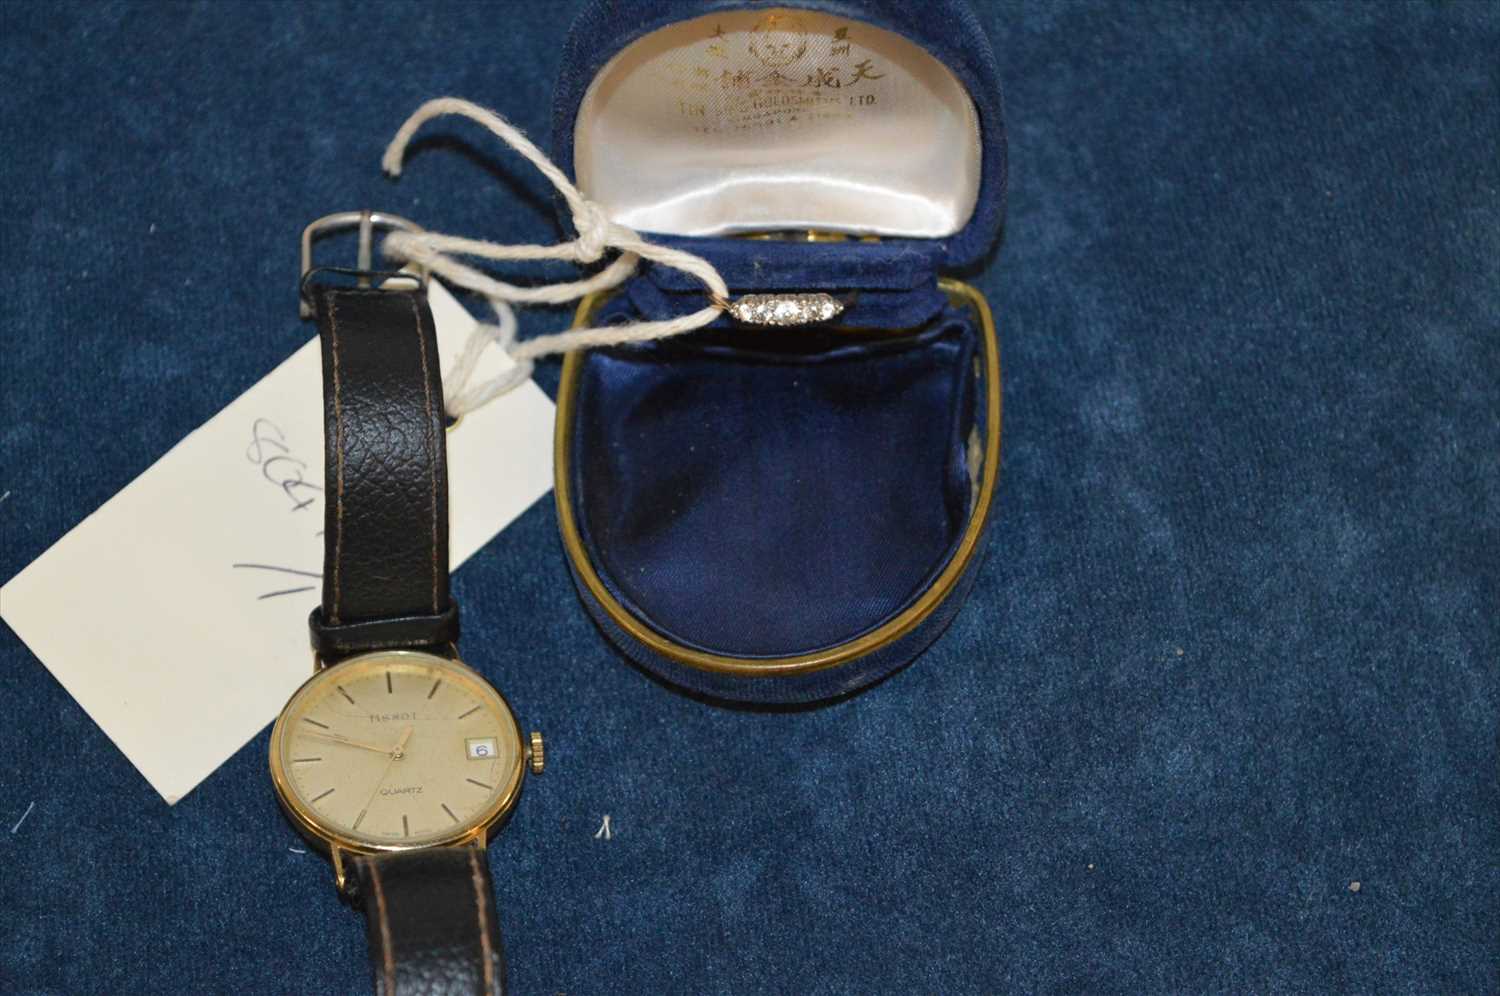 Lot 34 - Tissot watch and ring